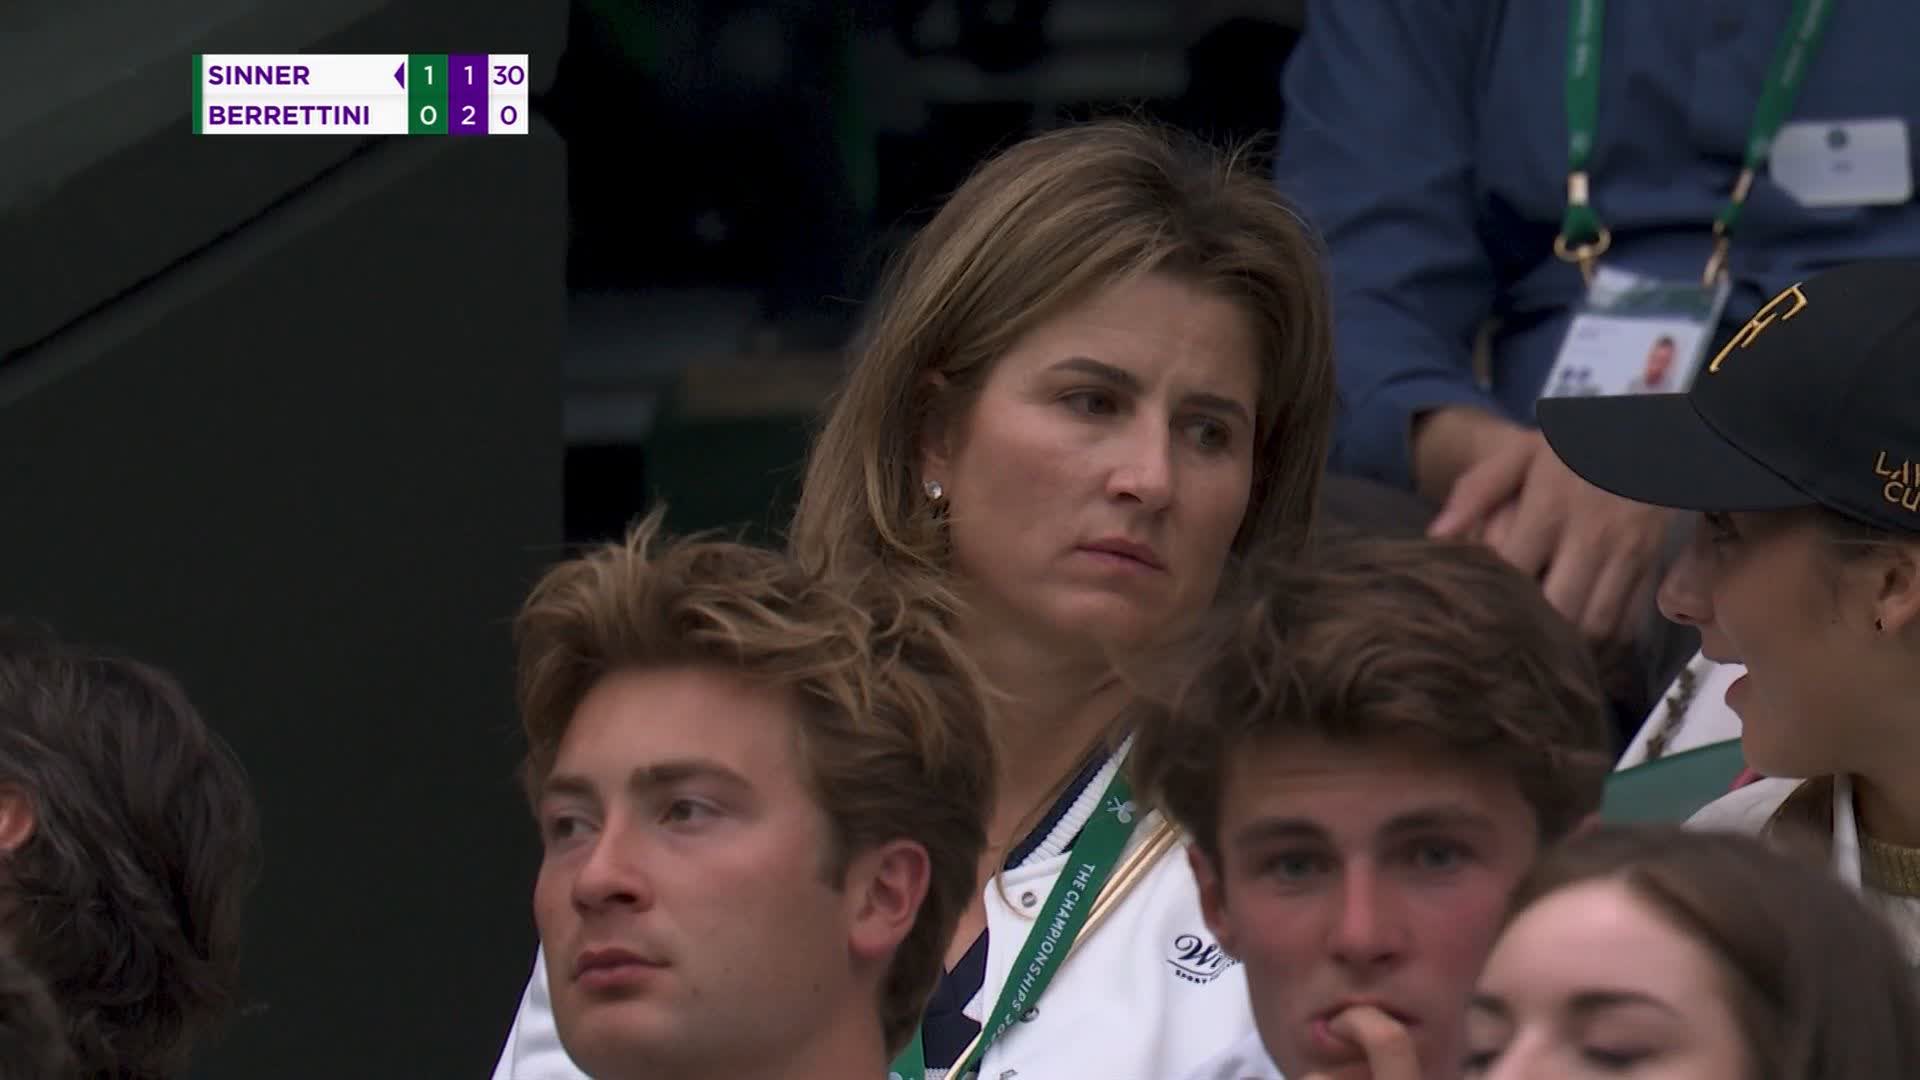 Tennis-mad Mirka Federer takes kids to watch shock Wimbledon clash without eight-time champion husband Roger